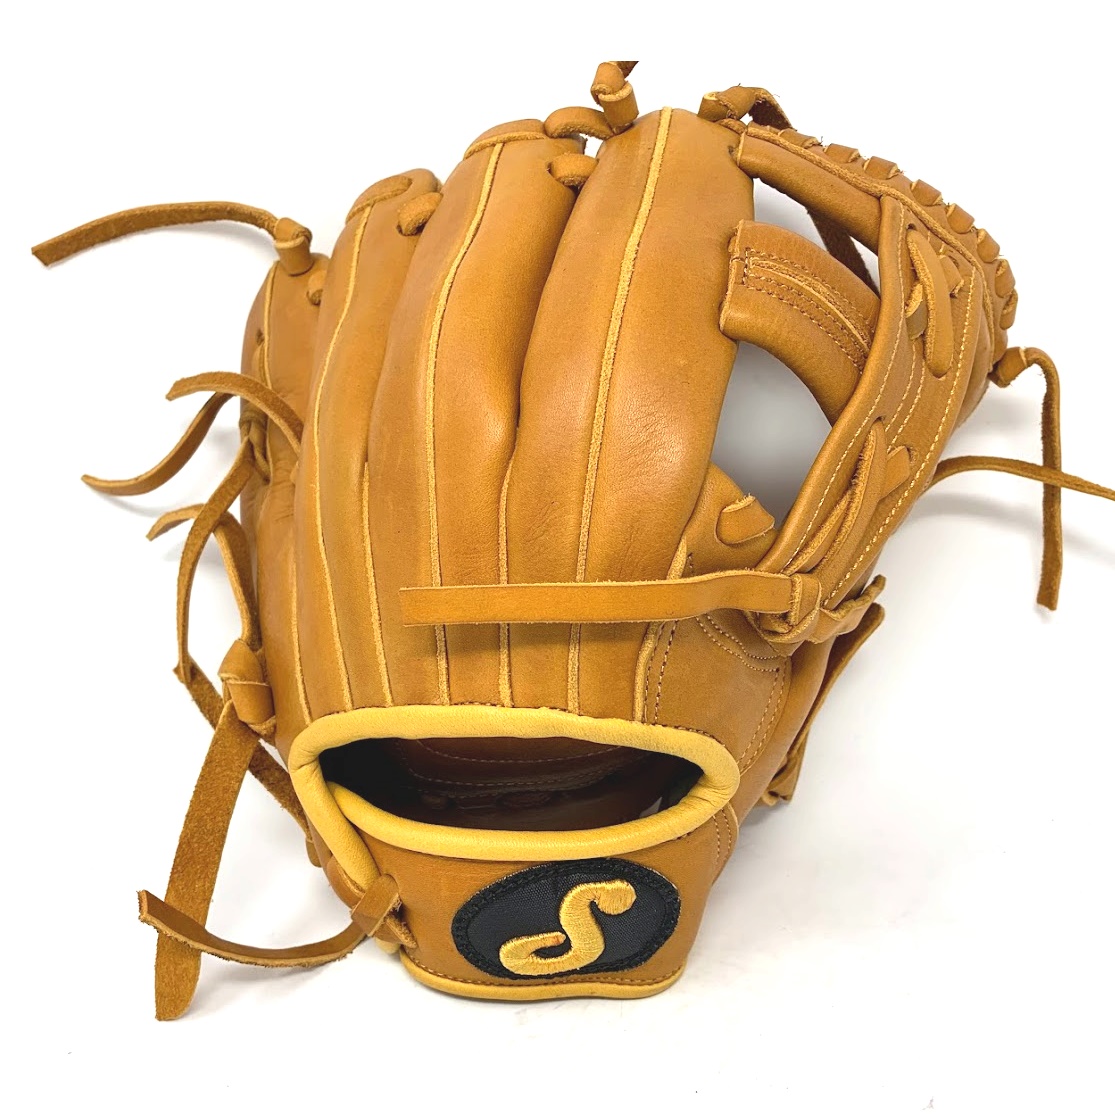 soto-honey-11-5-single-post-baseball-glove-right-hand-throw S20-115-HC-SP-RightHandThrow soto  Made in Mexico    The Soto family has been making gloves